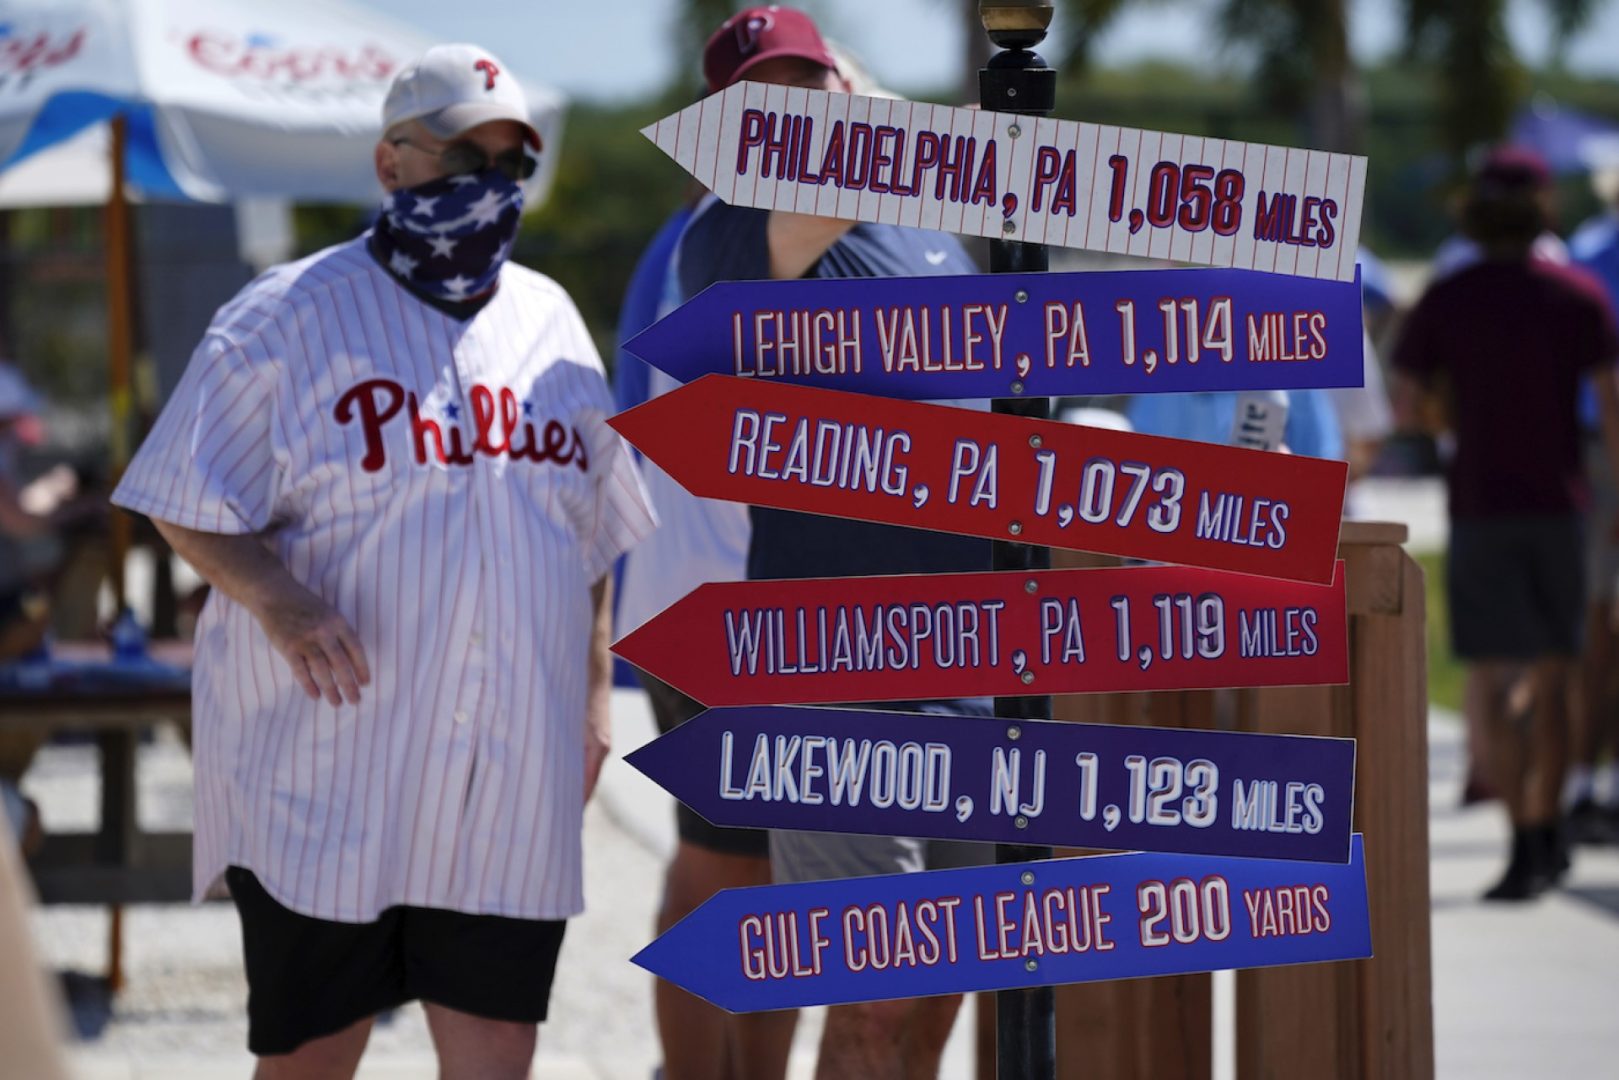 Phillies fans who booked trips to Clearwater for Spring Training